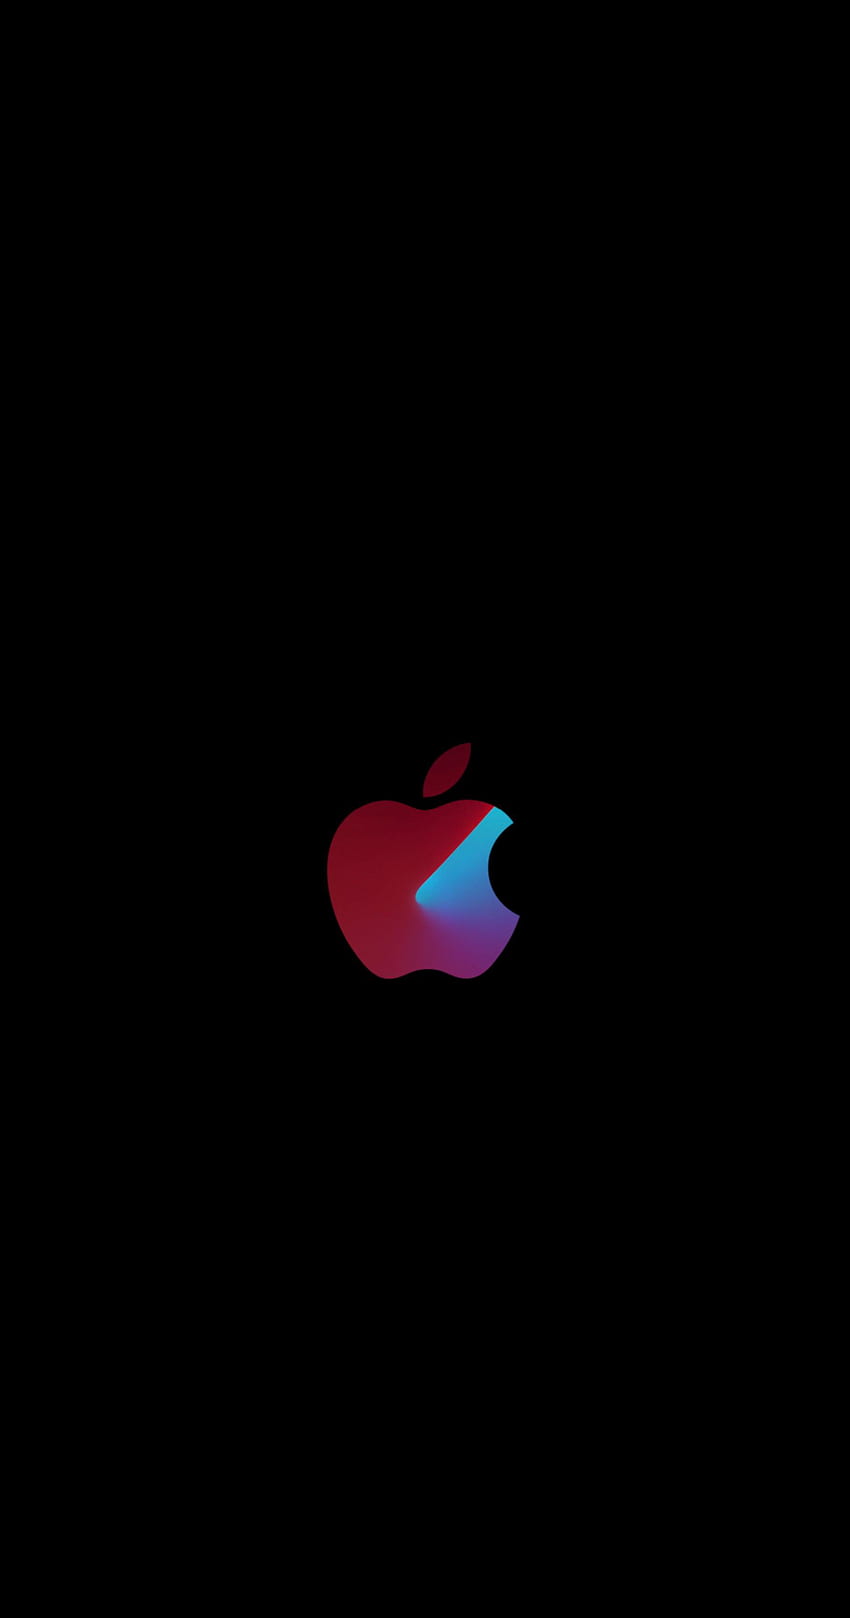 Minimalist apple I took the idea of one of apples current and incorporated it with the Apple logo (): Amoledbackground HD phone wallpaper